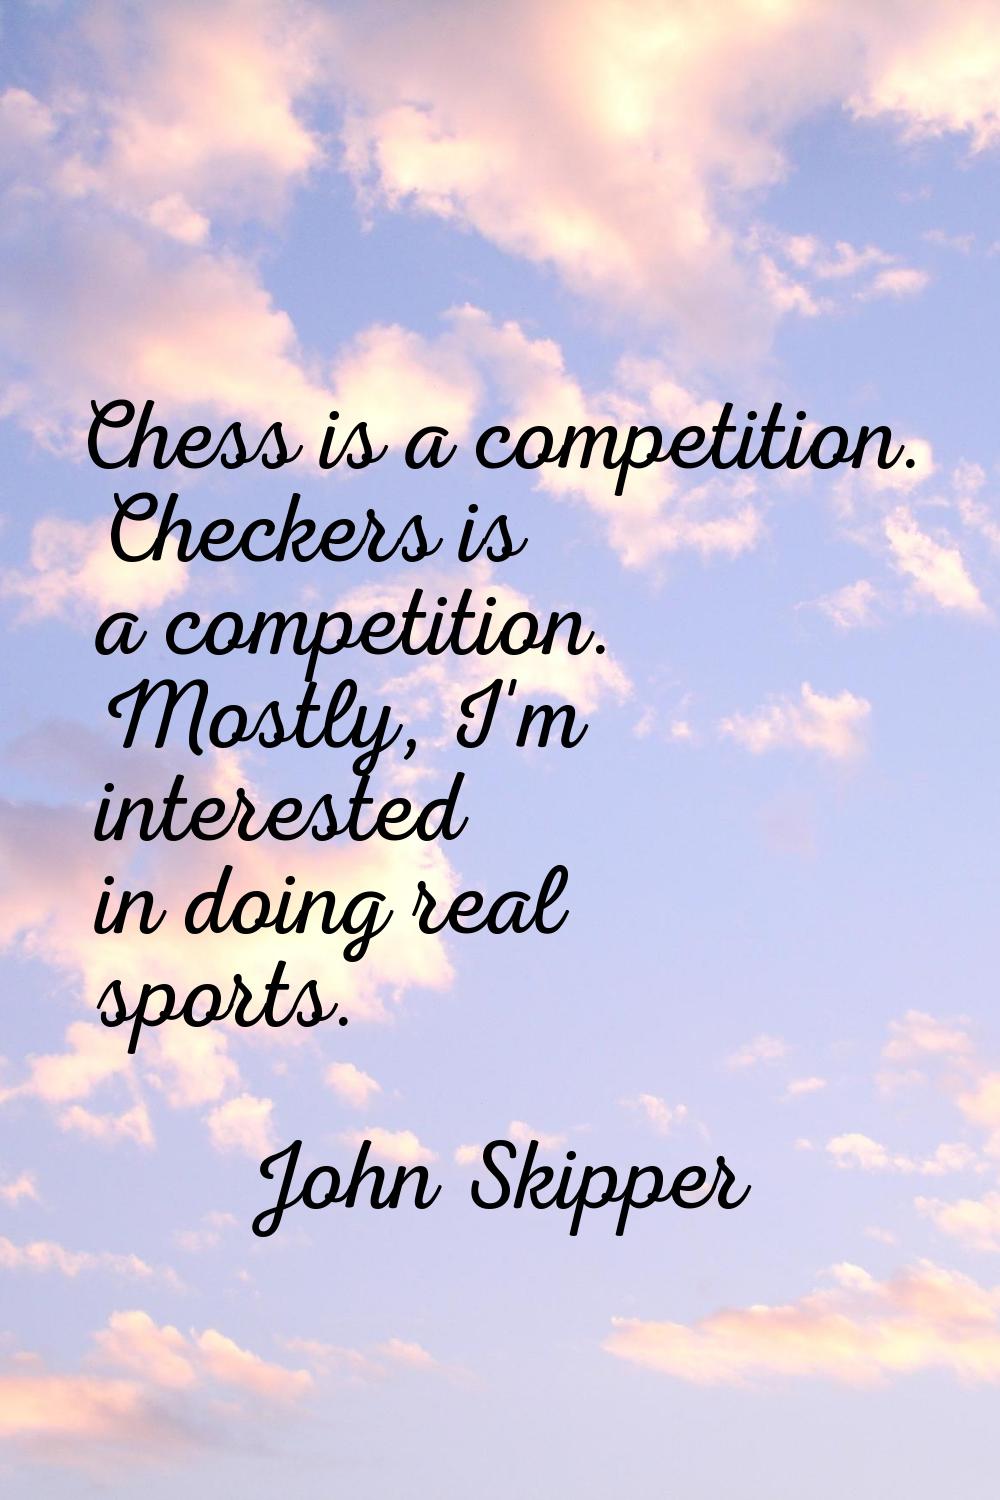 Chess is a competition. Checkers is a competition. Mostly, I'm interested in doing real sports.